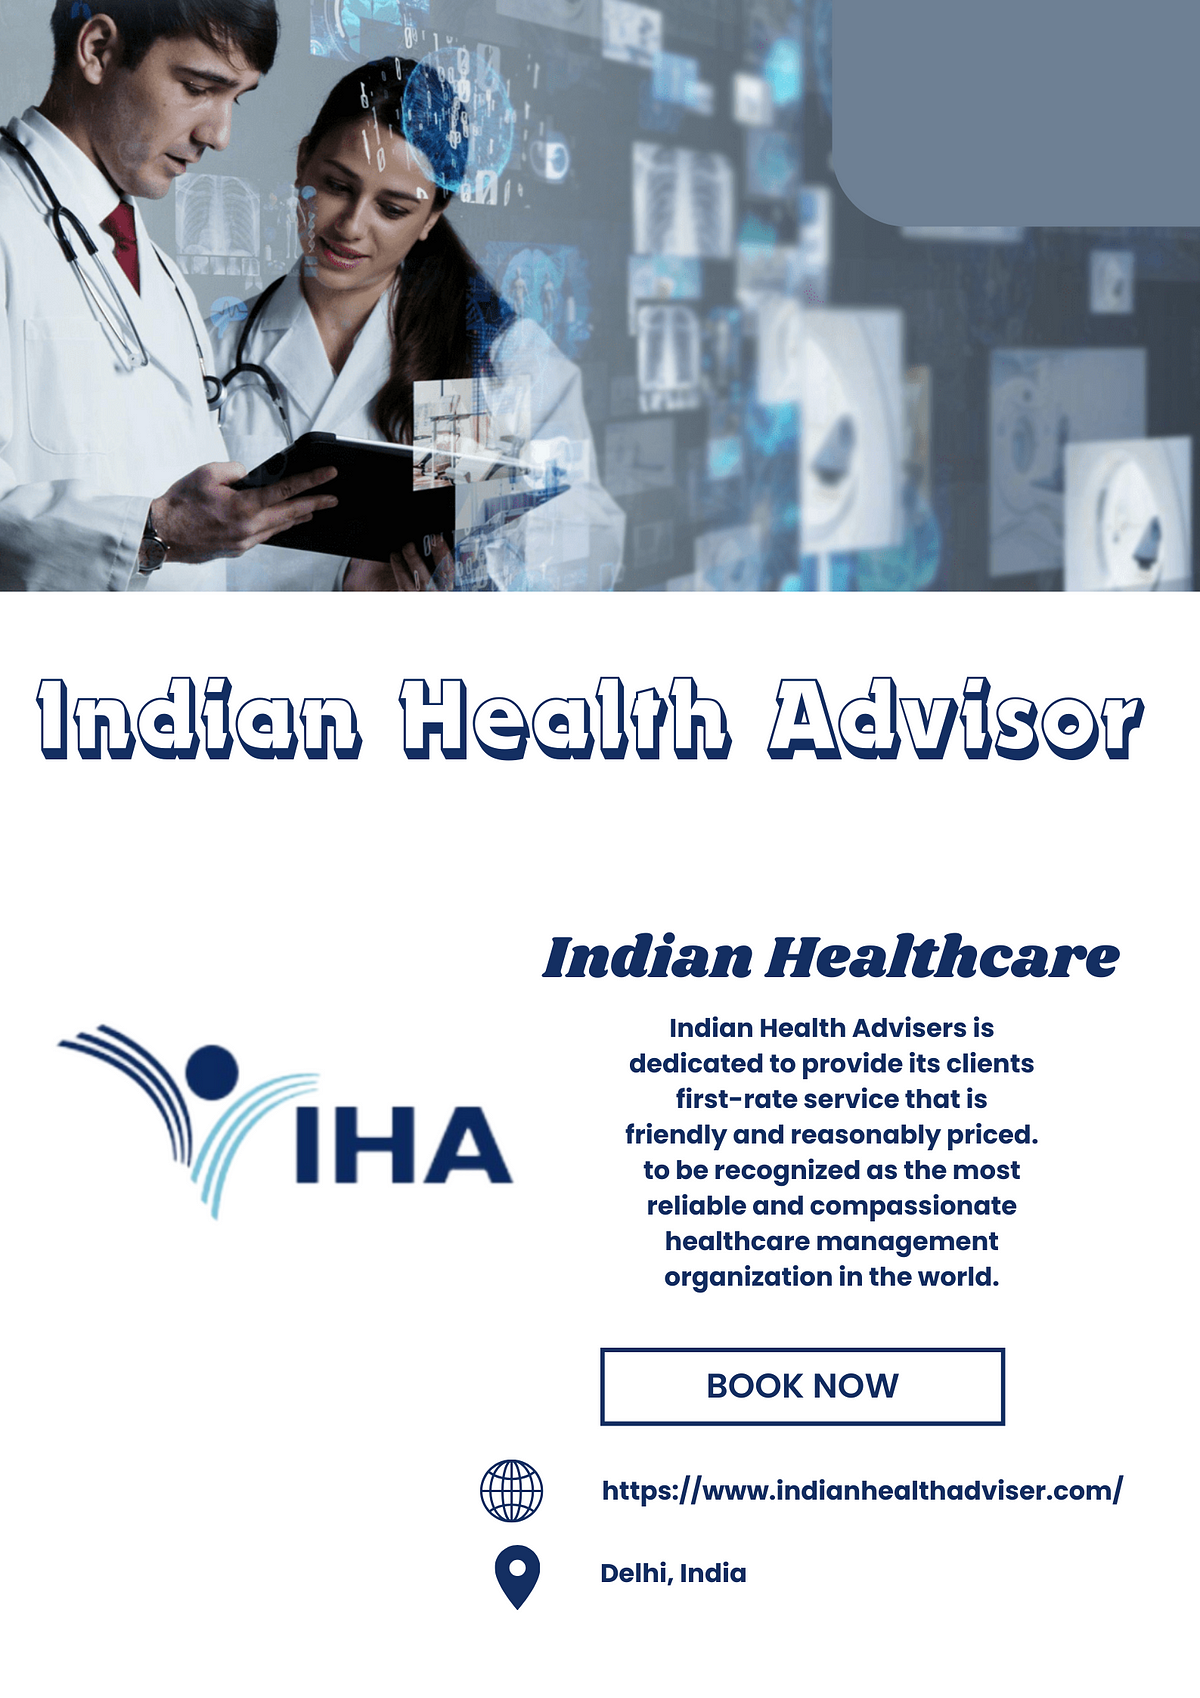 Top Indian Healthcare Hospitals Provided By Indian Healthcare Advisor | by Indian Health Adviser | Jan, 2024 | Medium